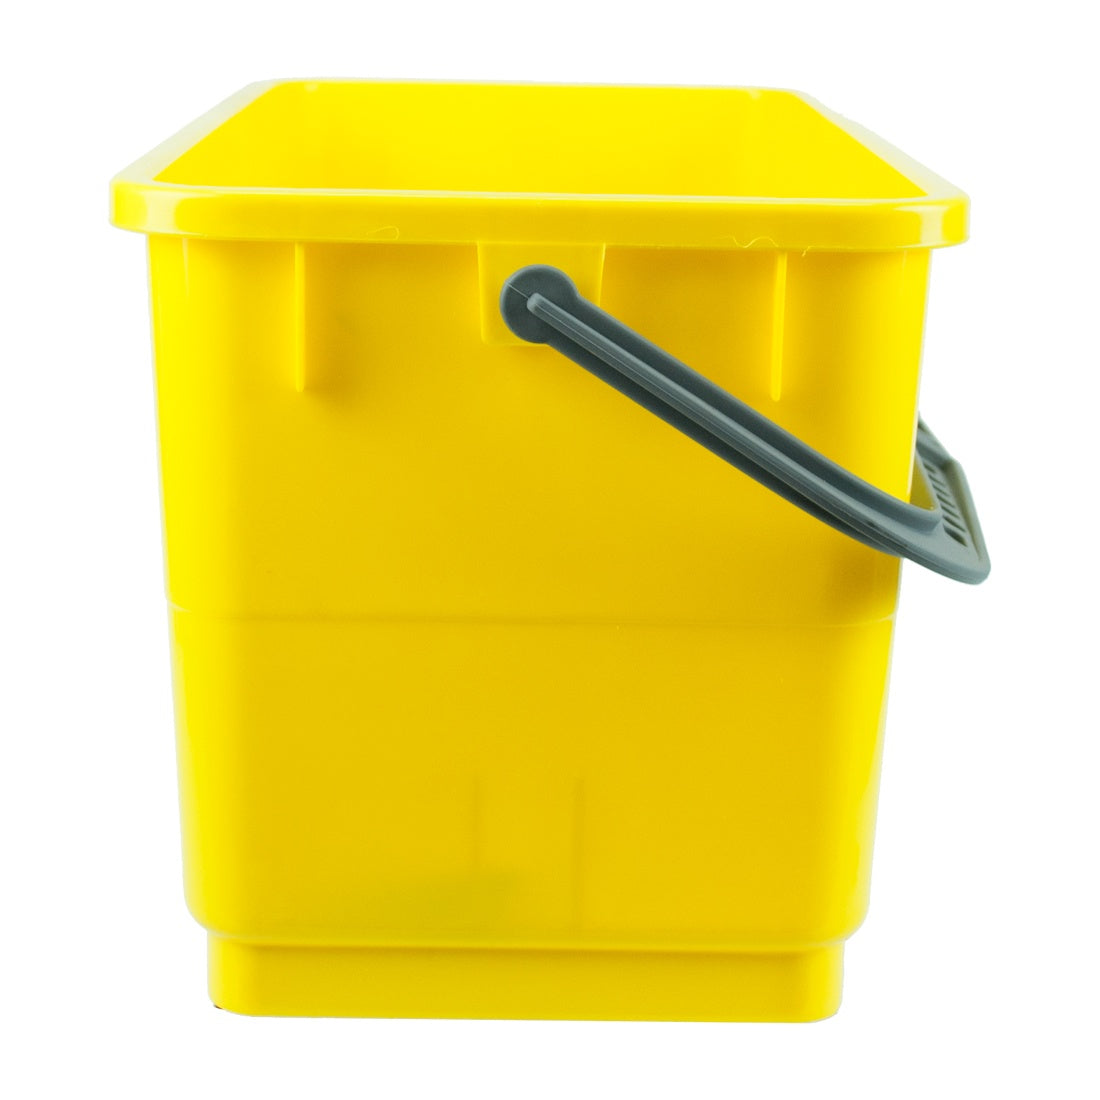 Window Cleaning Buckets - Products, Supplies, and Equipment